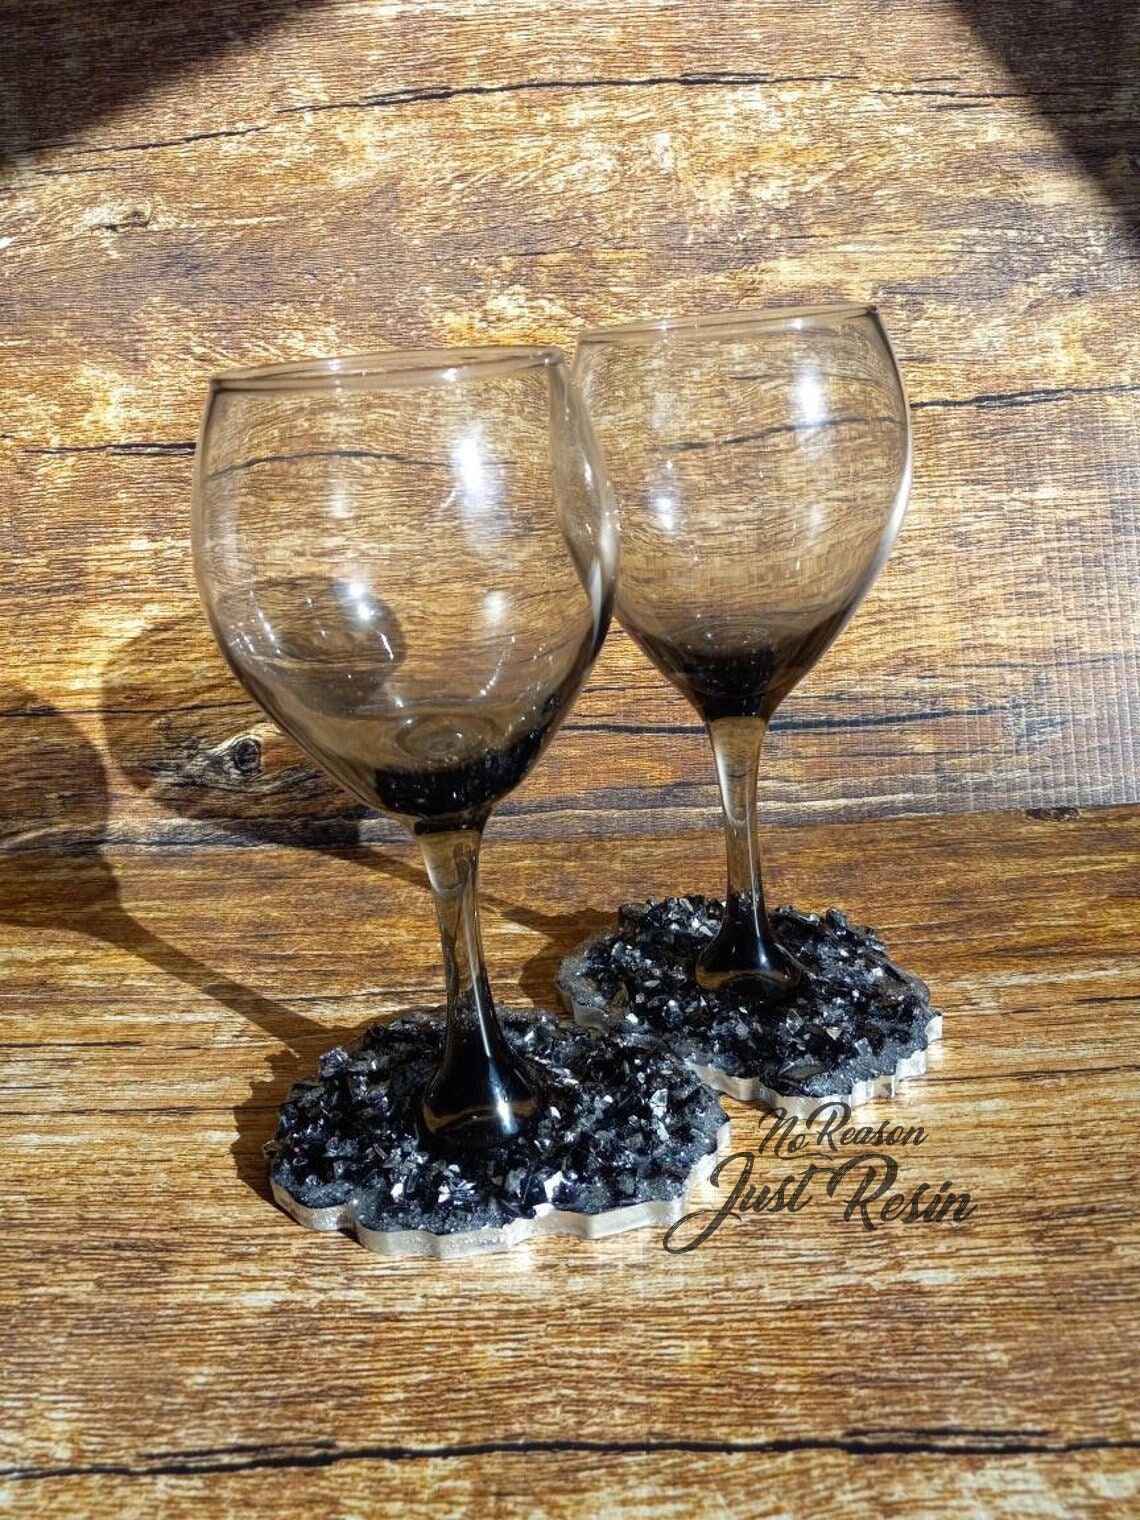 Make a wine glass from recycled wood and epoxy resin